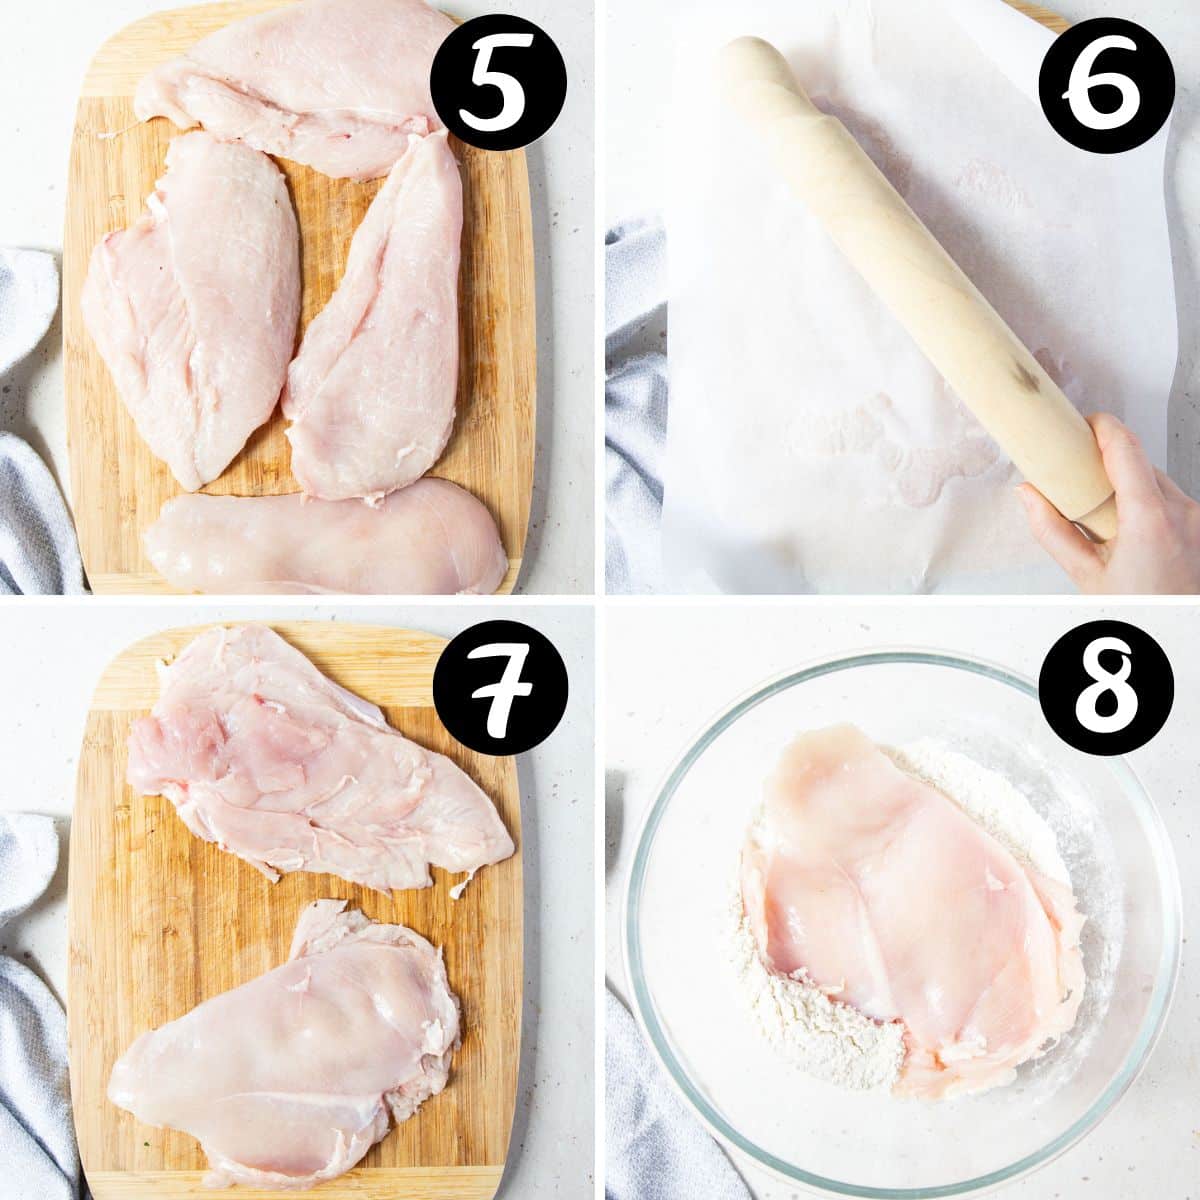 steps showing chicken breasts on a wooden board being flattened with a rolling pin.